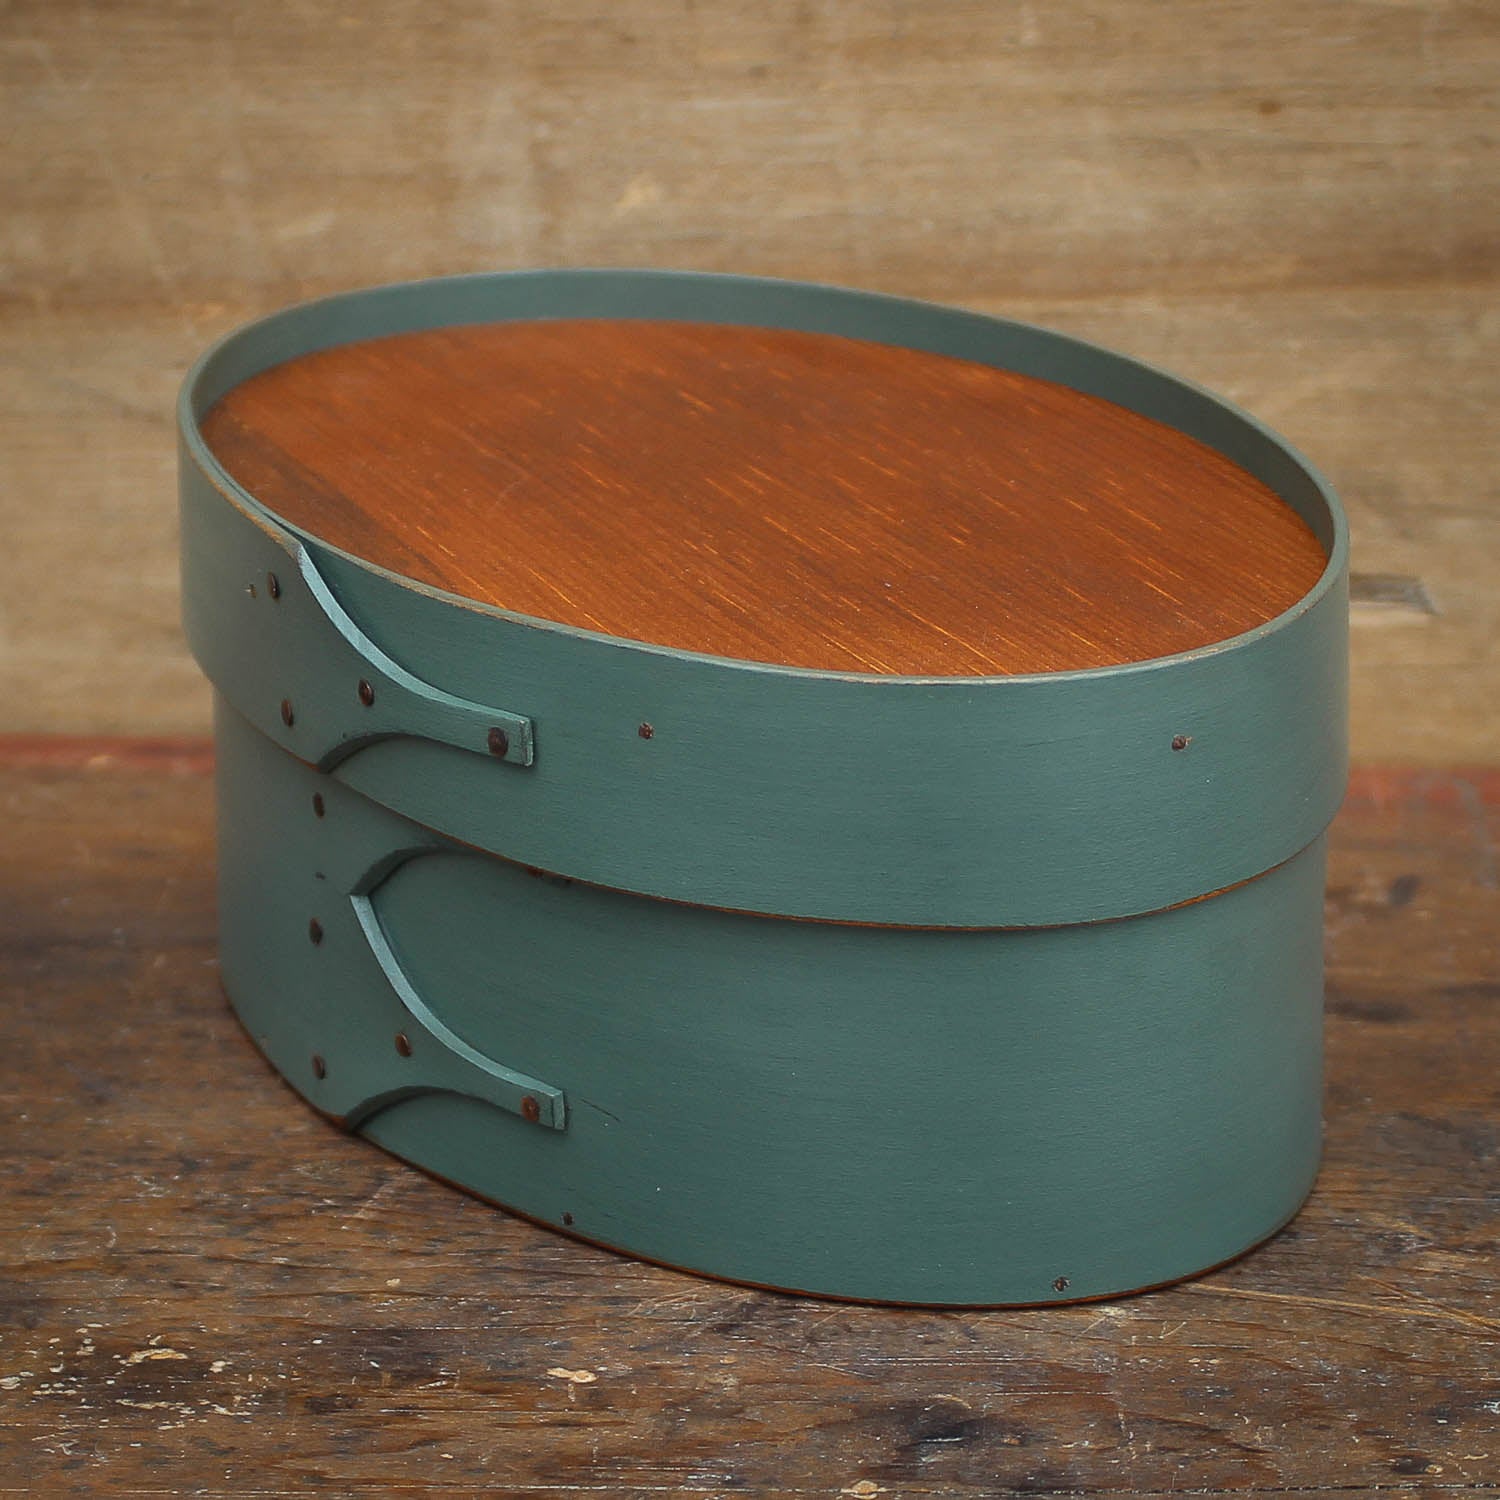 Shaker Oval Box with Recessed Lid for Needlework, Size #3, LeHays Shaker Boxes, Sea Green Milk Paint Finish, Side View